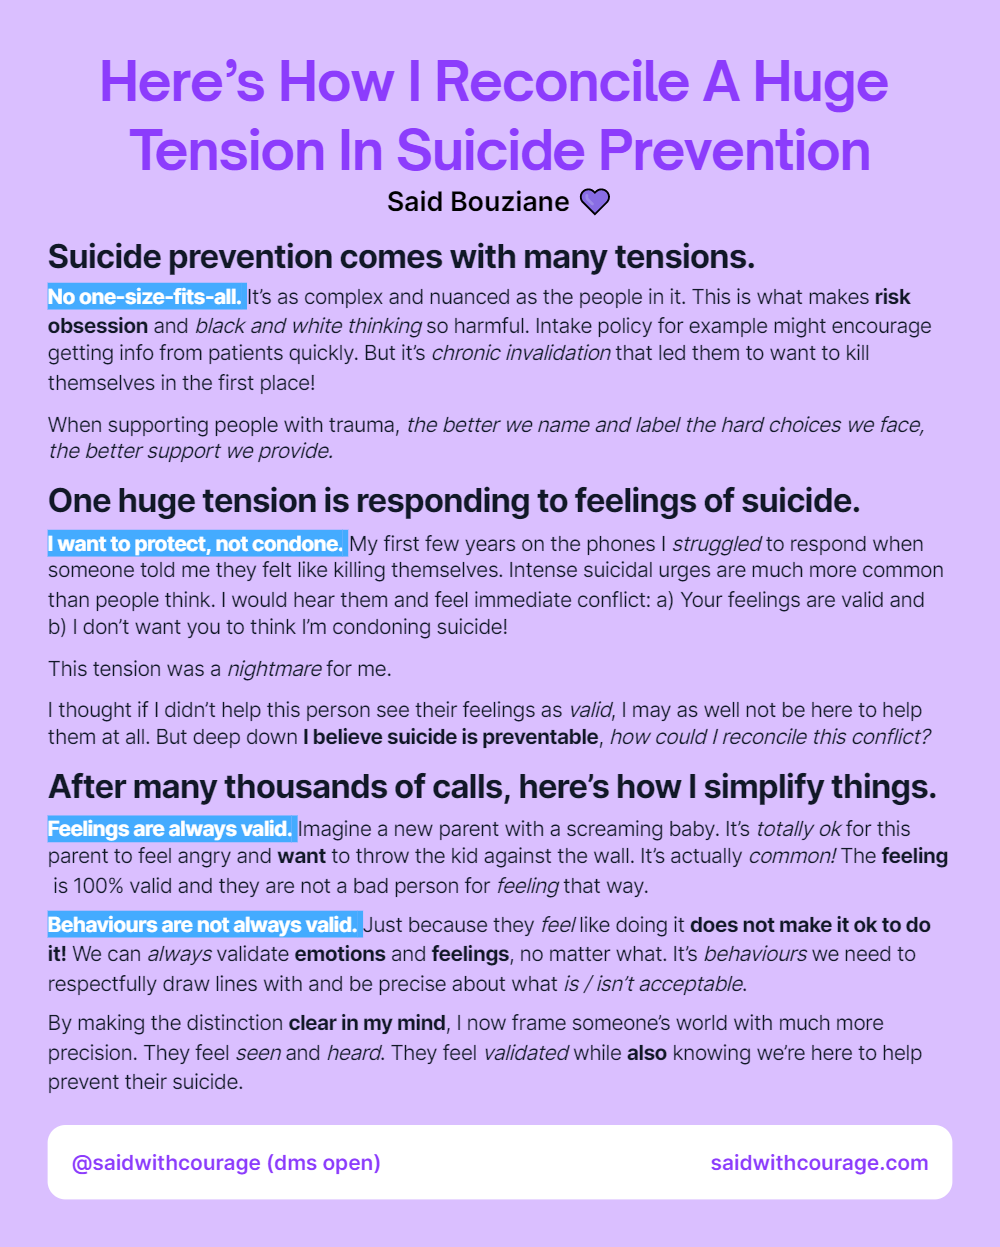 Here’s How I Reconcile A Huge Tension In Suicide Prevention